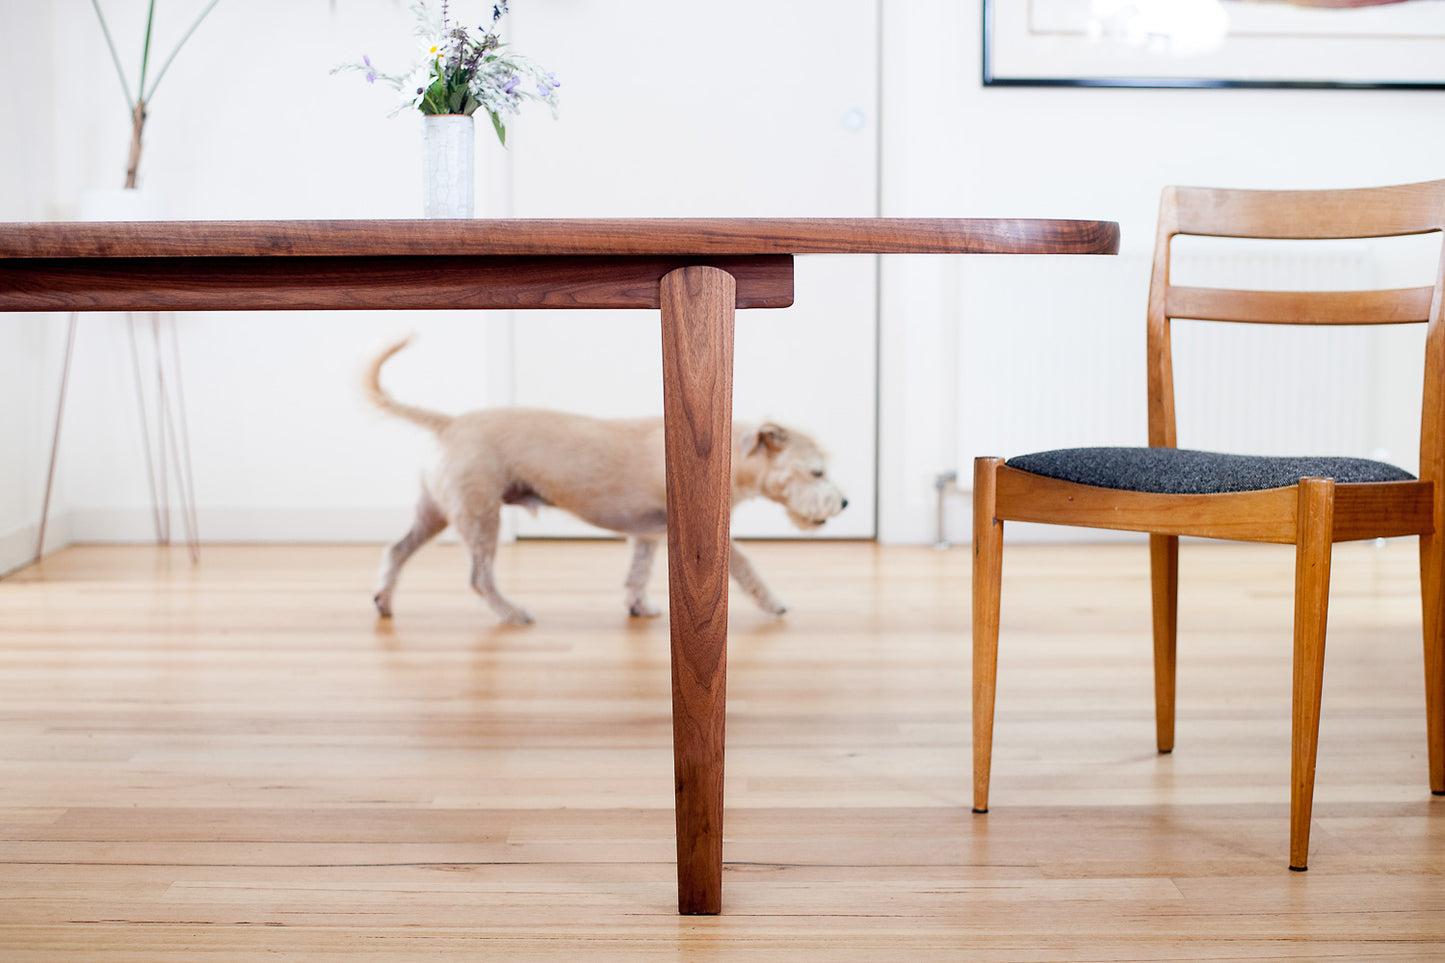 Wesley Dining Table in Walnut with dining chair and dog walking in background - front view. Designed and made by Hey, Porter.